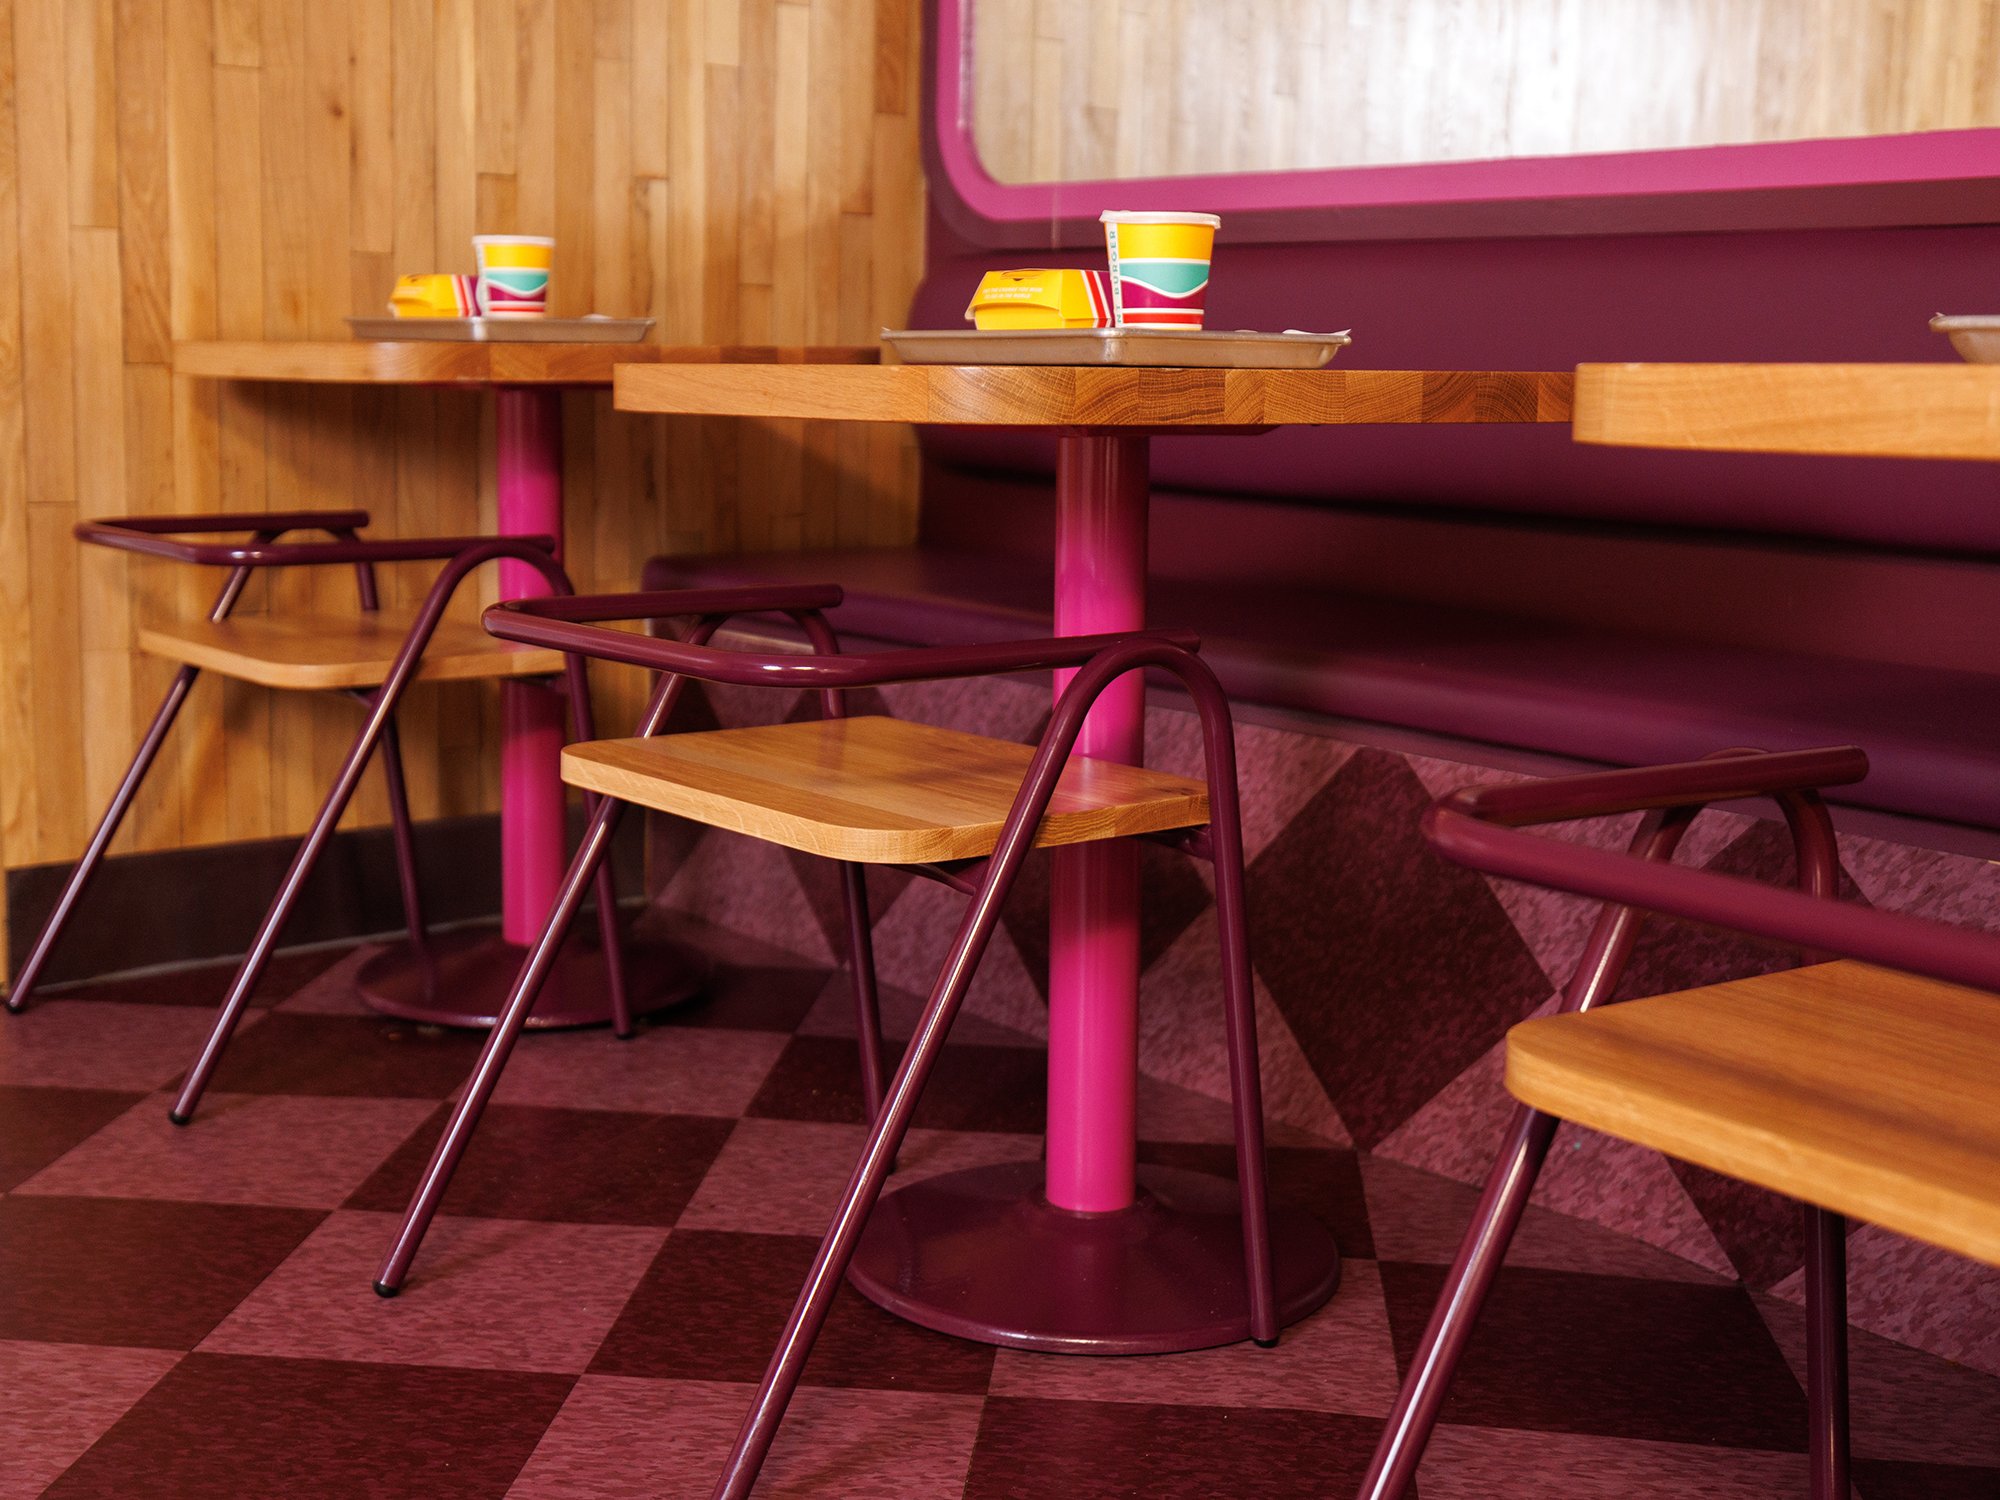 Restaurant scene with magenta checkered floors and tables and natural food finishes. 